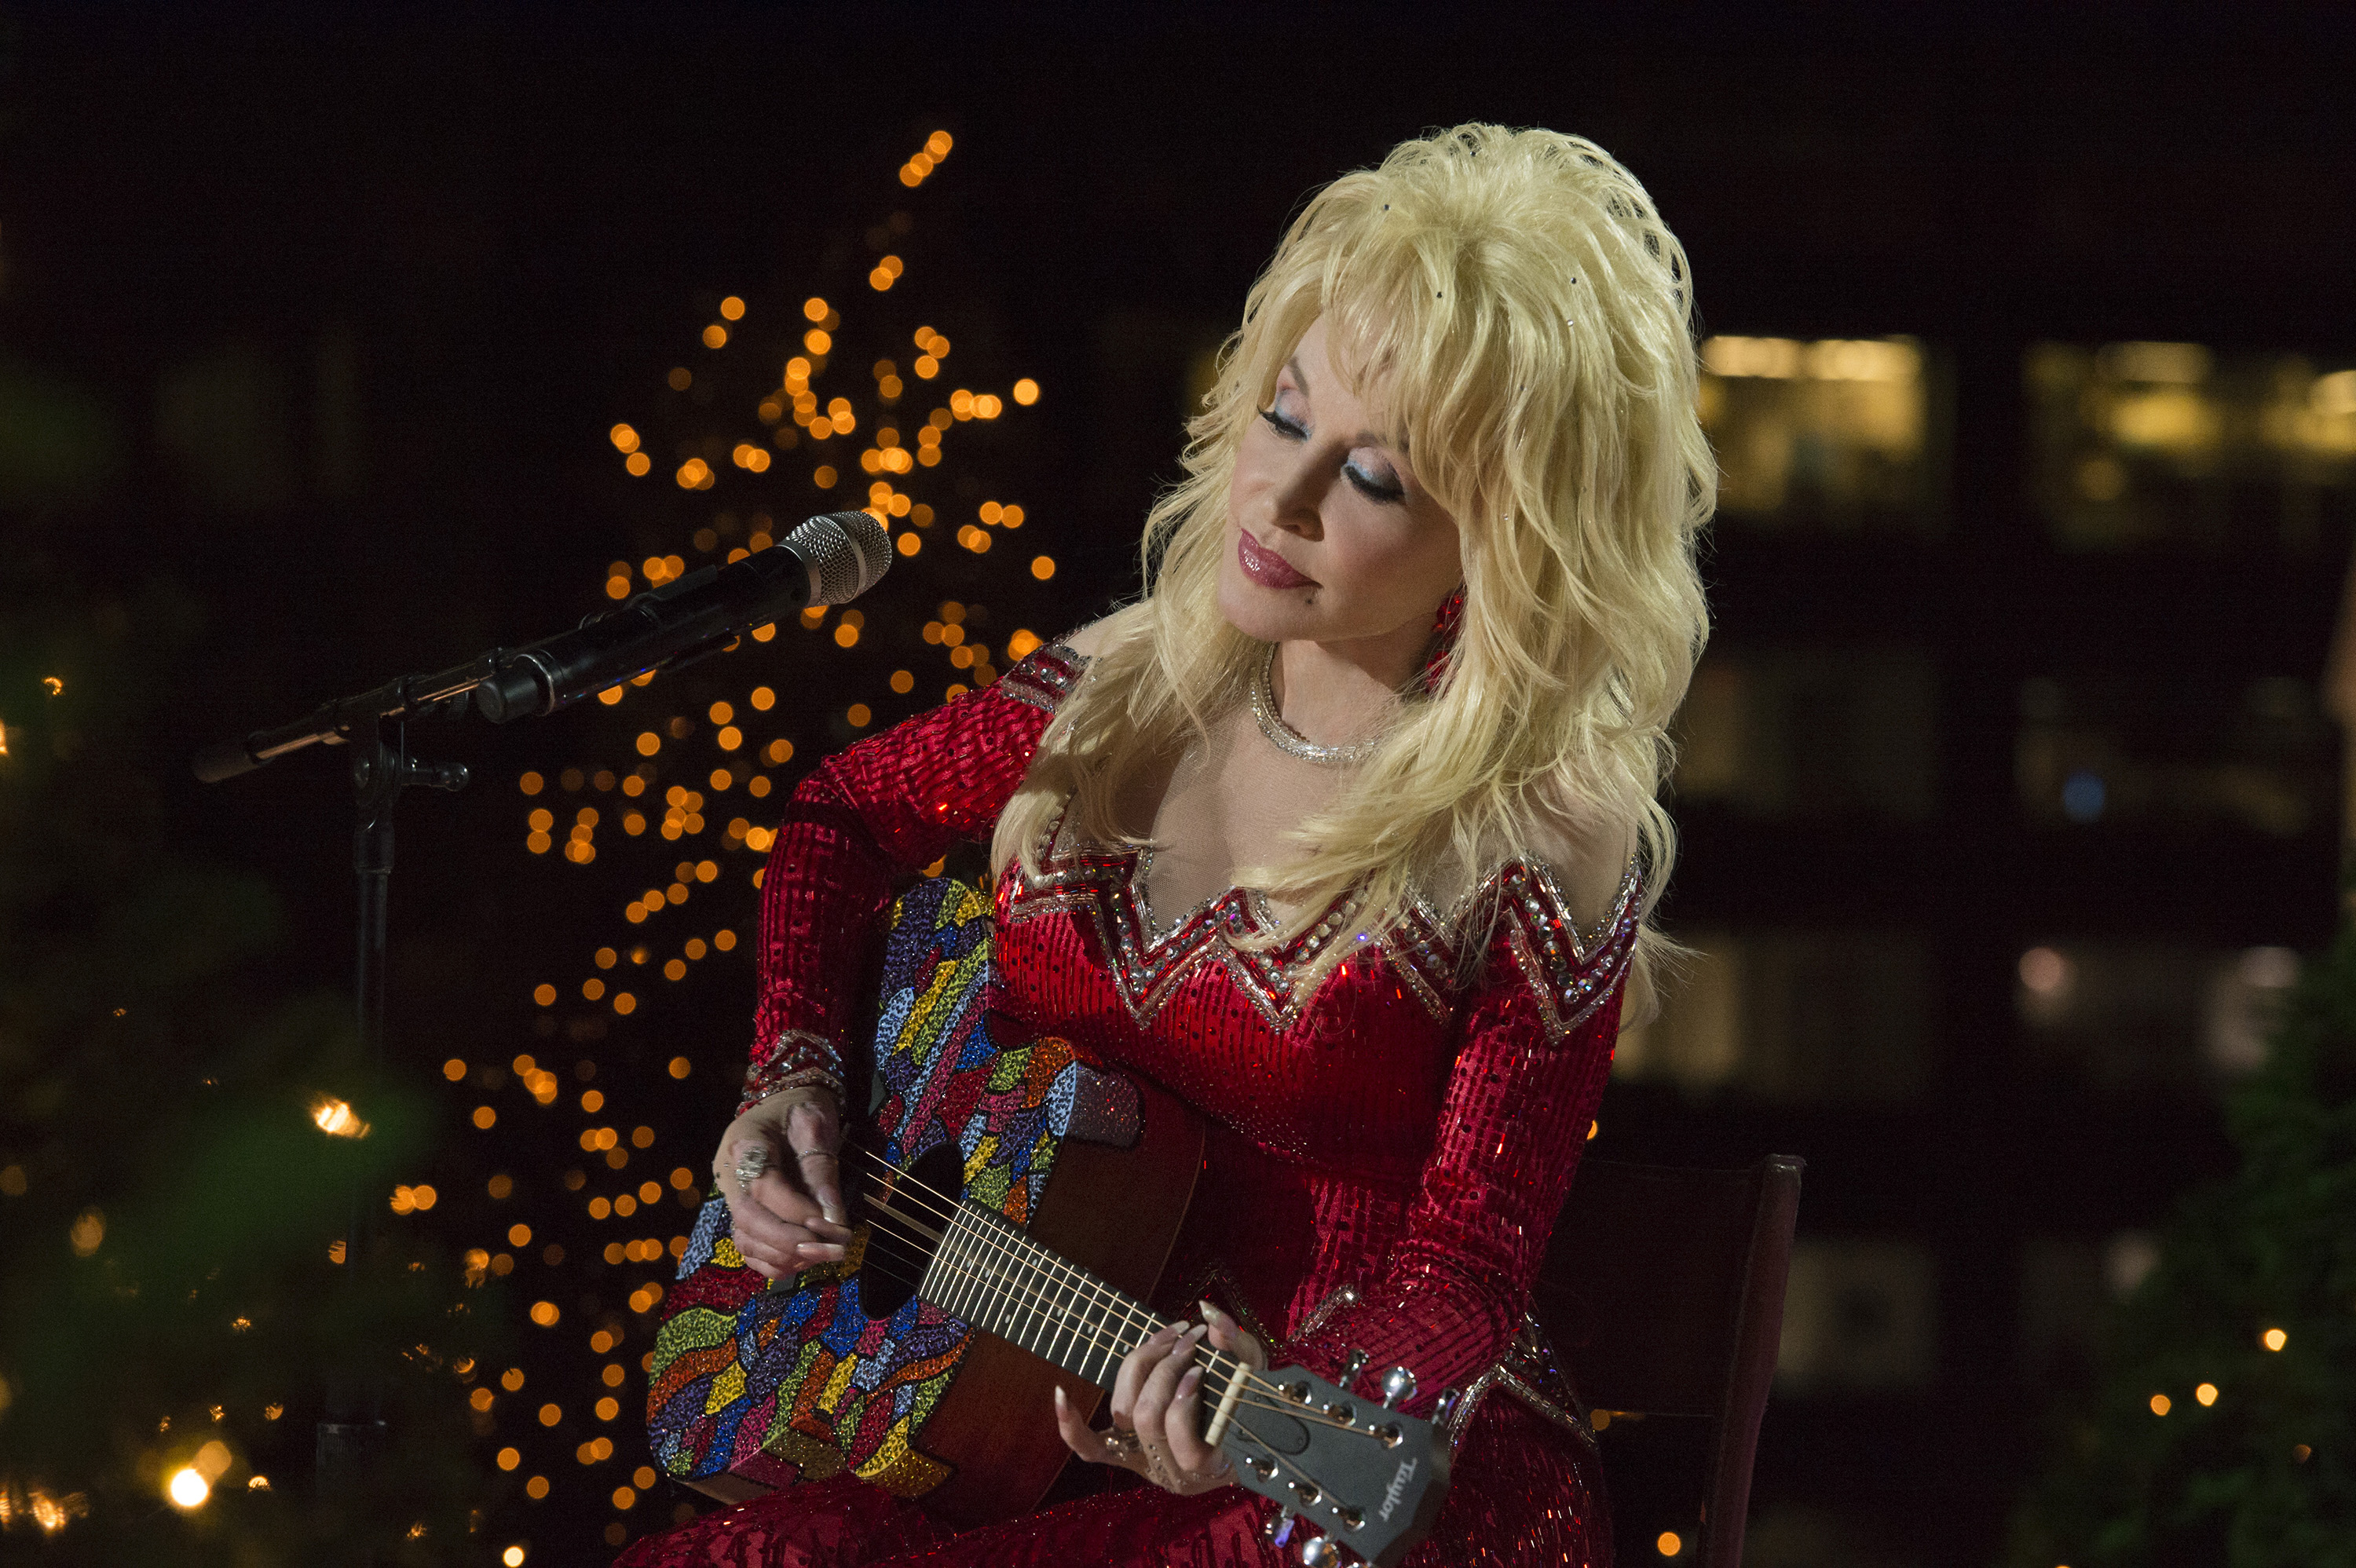 Dolly Parton plays the guitar